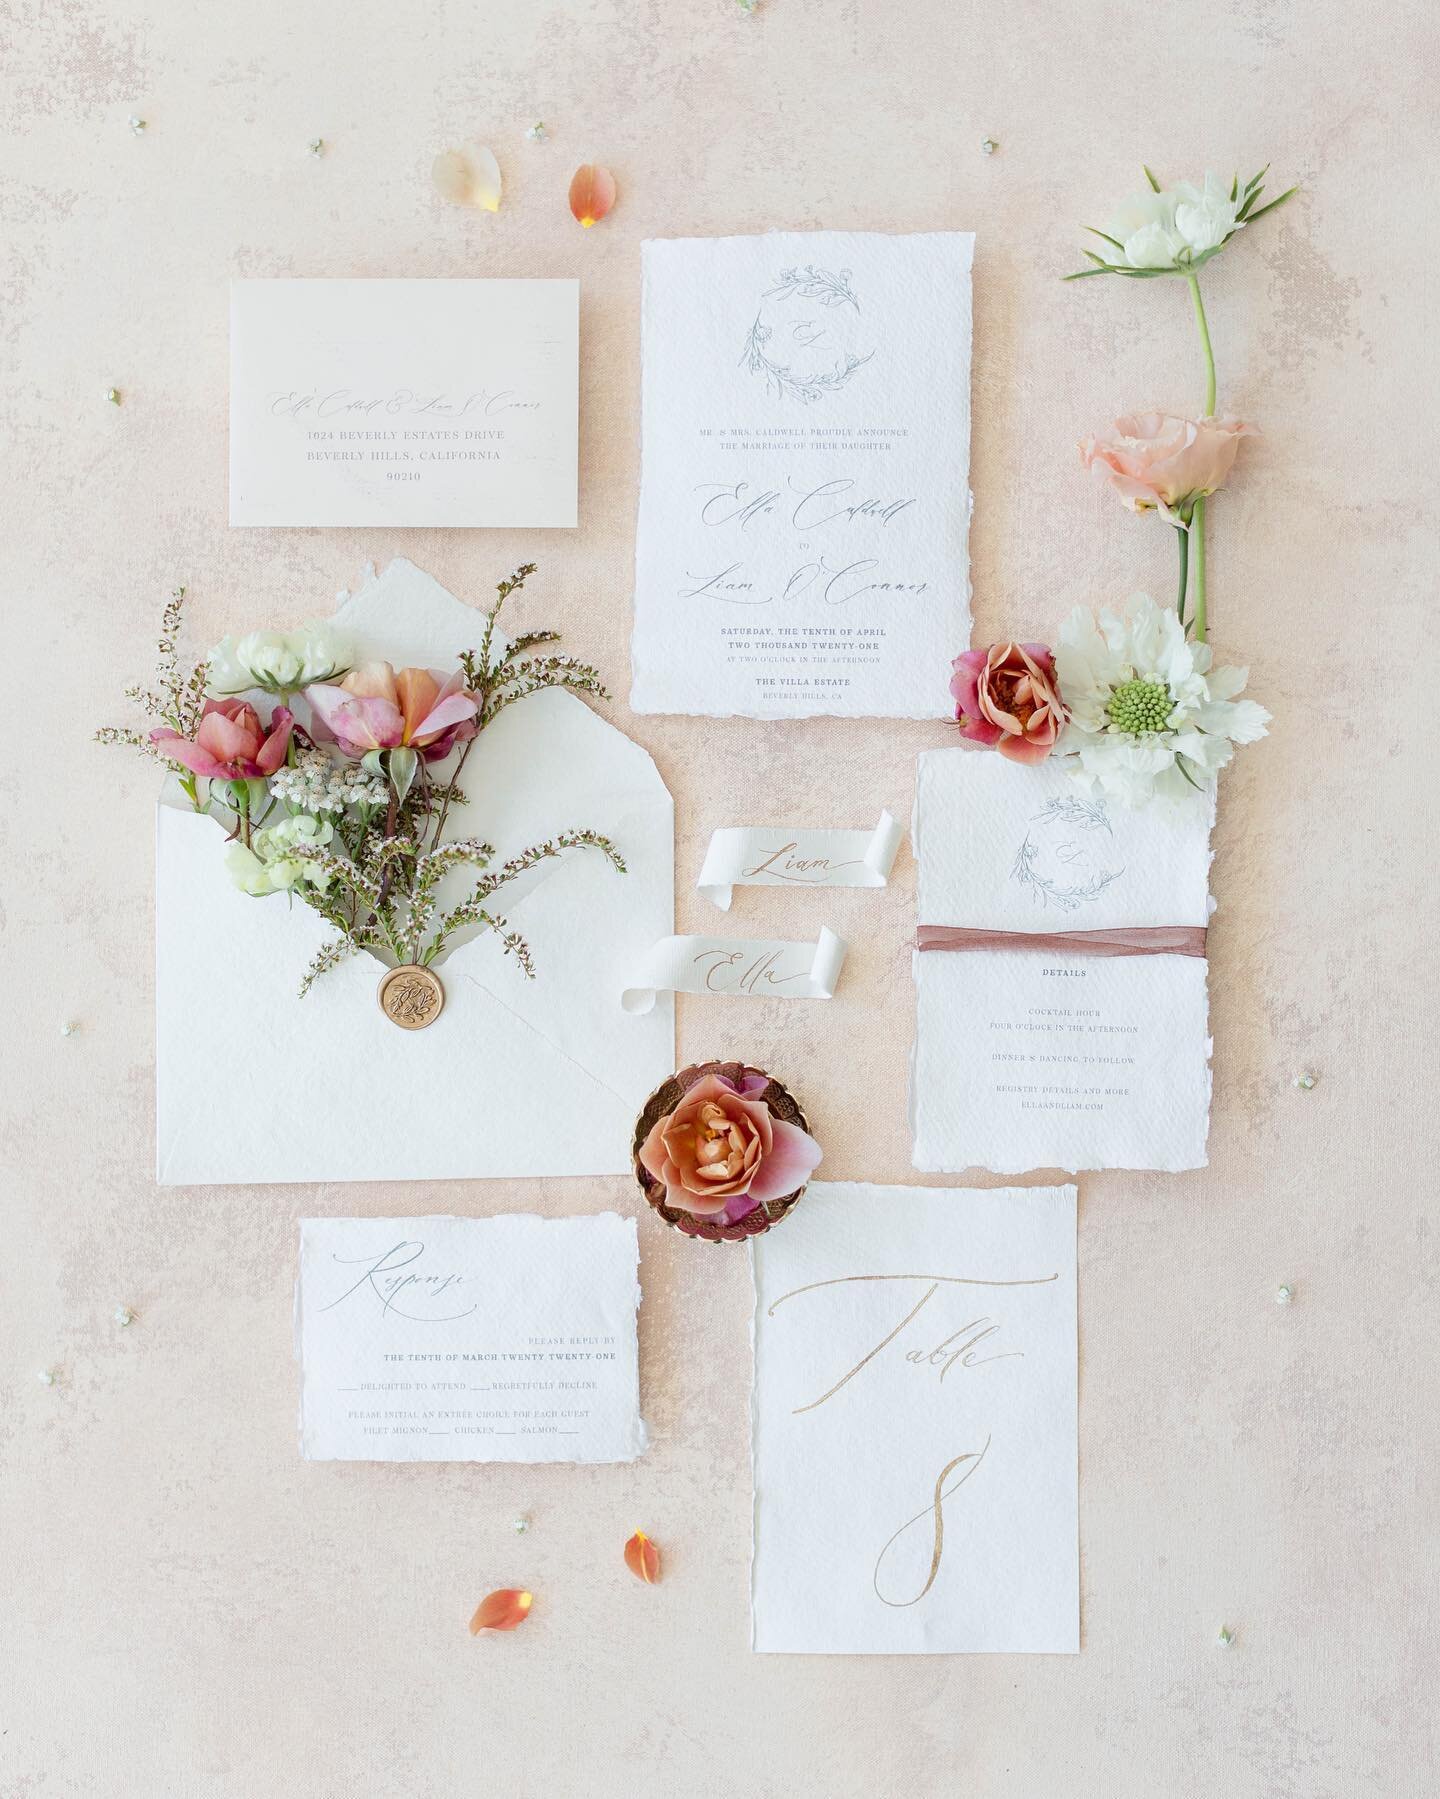 LIVE on the front page of @stylemepretty today! ✨
⠀ 
Created with intentionality, together with @bowtiesnbouquets and @lorinkellyphoto, we designed this luxury Fine Art Stationery Suite for the modern, minimal, ethereal bride. Gorgeous intricate deta